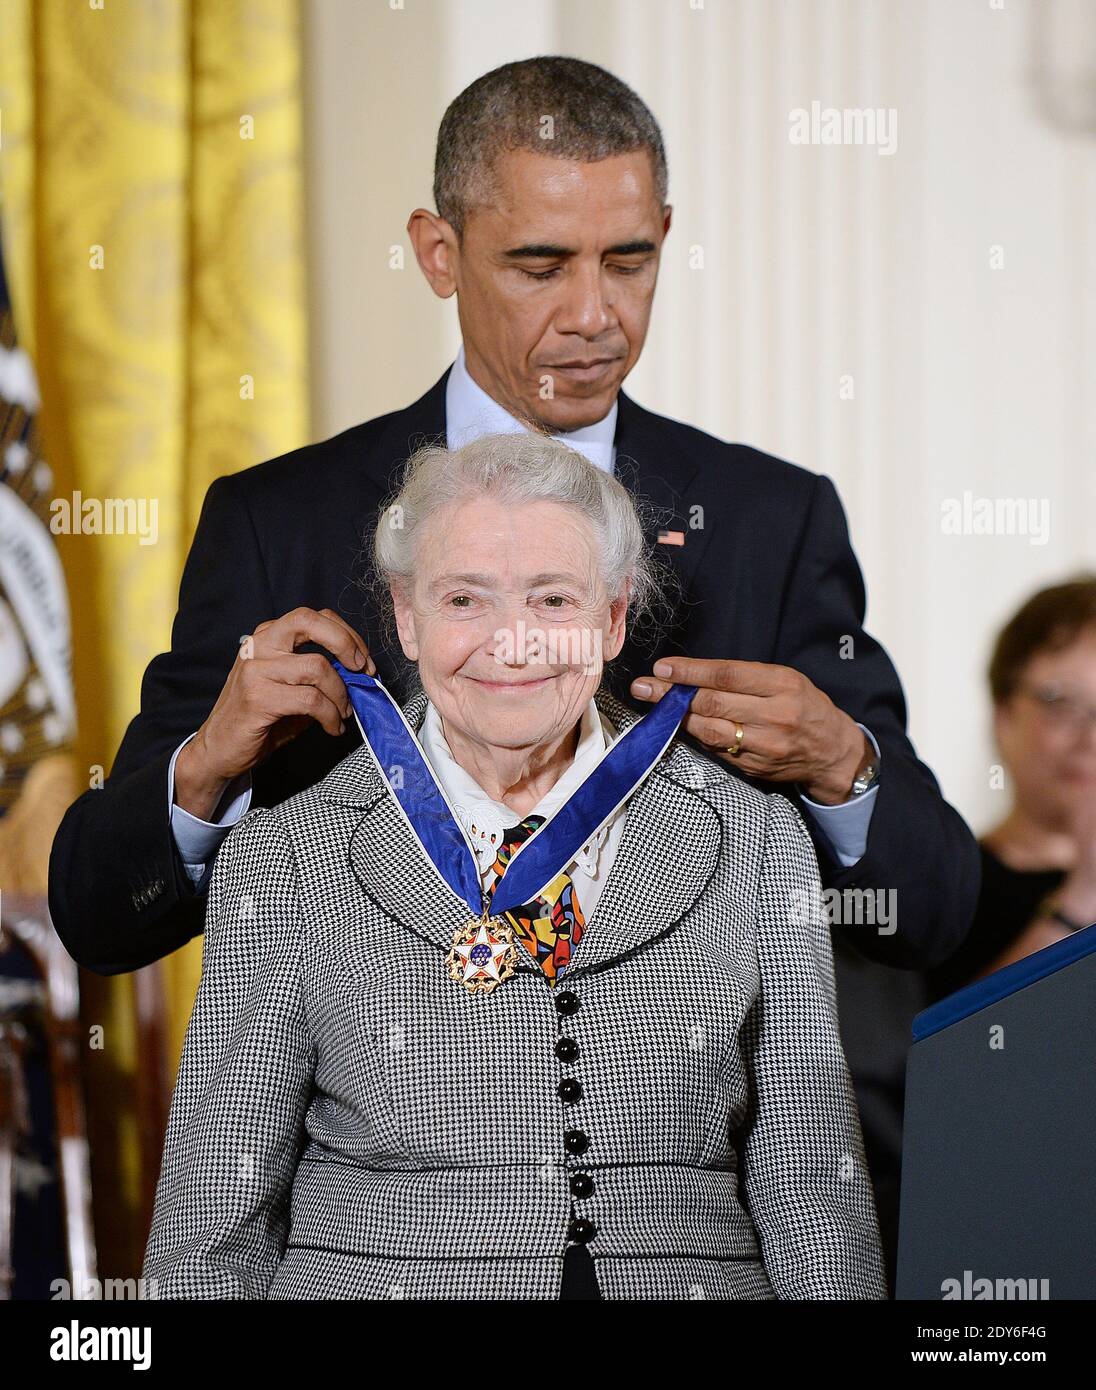 https://c8.alamy.com/comp/2DY6F4G/us-president-barack-obama-presents-the-medal-of-freedom-to-physicists-mildred-dresselhaus-during-a-ceremony-in-the-east-room-of-the-white-house-in-washington-dc-usa-on-november-24-2014-the-medal-of-freedom-is-the-country-highest-civilian-honor-photo-by-olivier-doulieryabacapresscom-2DY6F4G.jpg